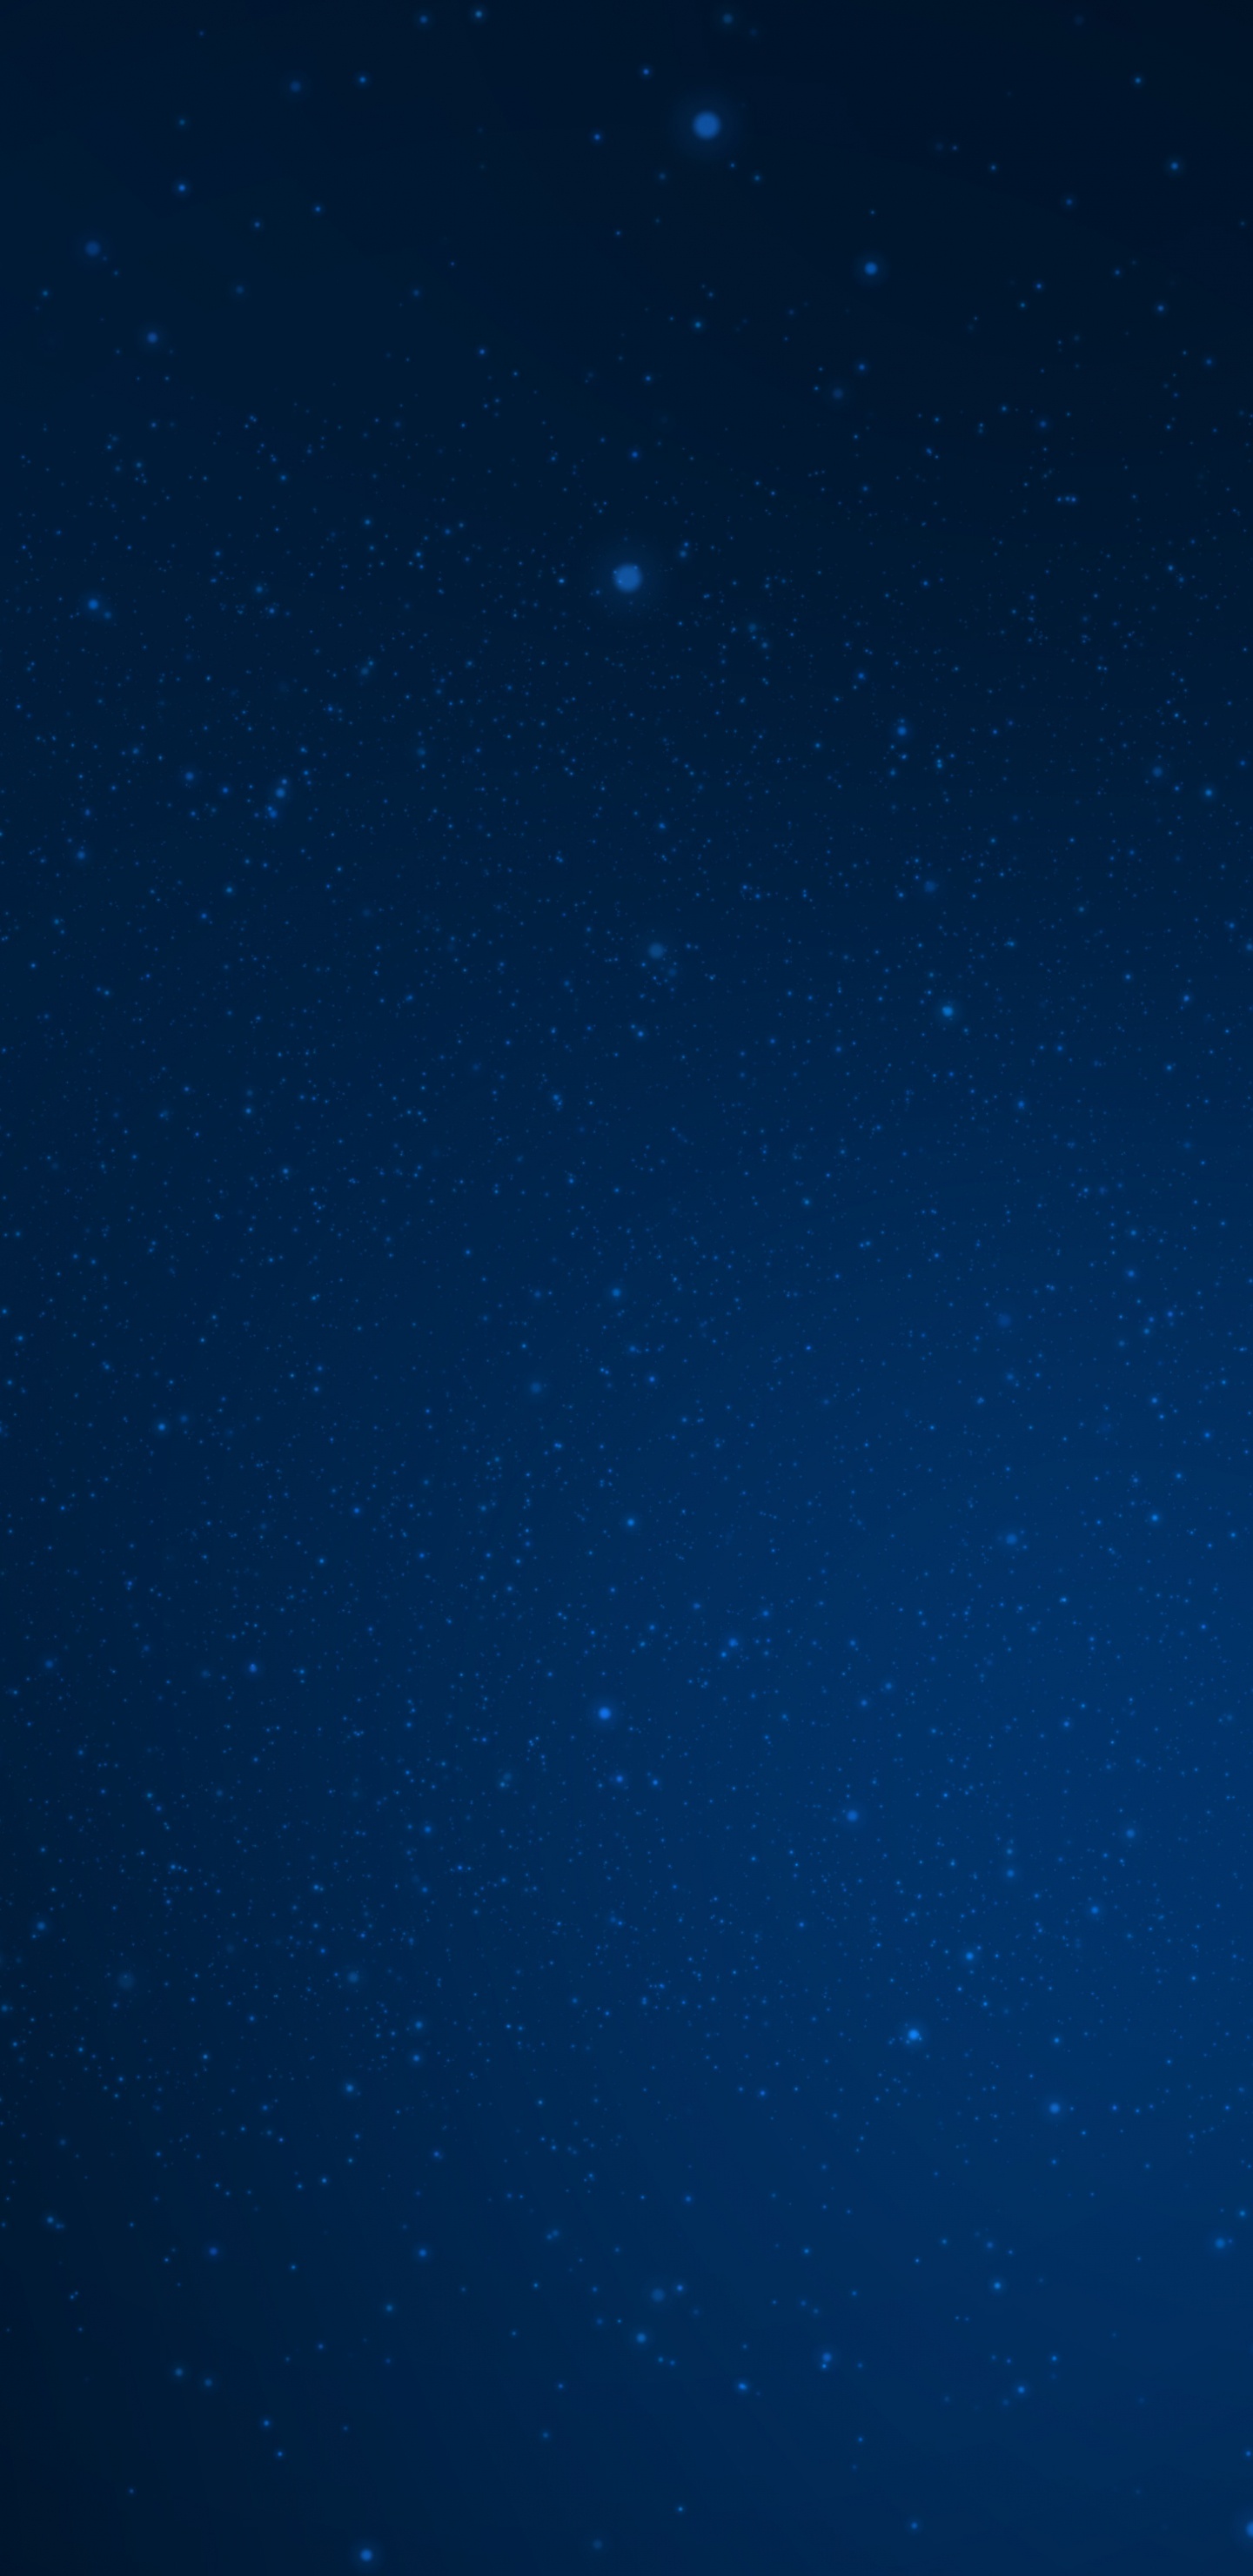 Blue Sky With Stars During Night Time. Wallpaper in 1440x2960 Resolution